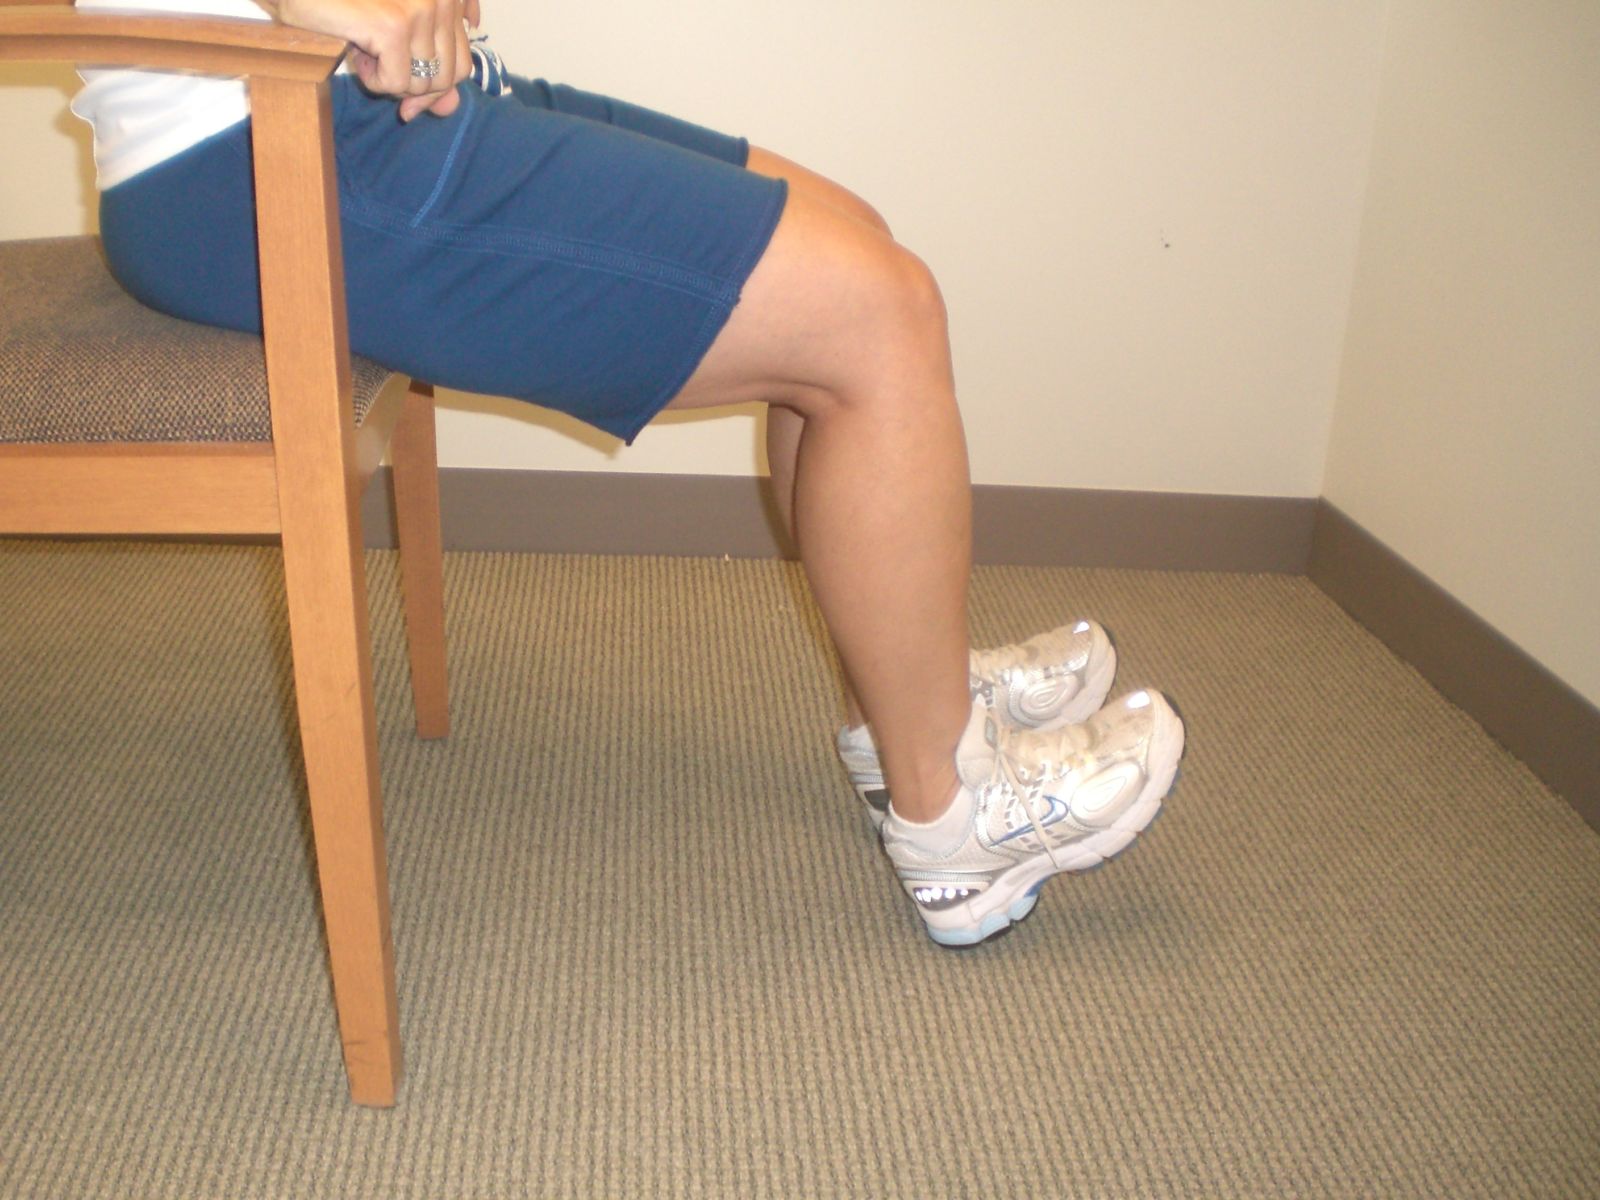 Exercises For Peripheral Neuropathy - Physical Therapy